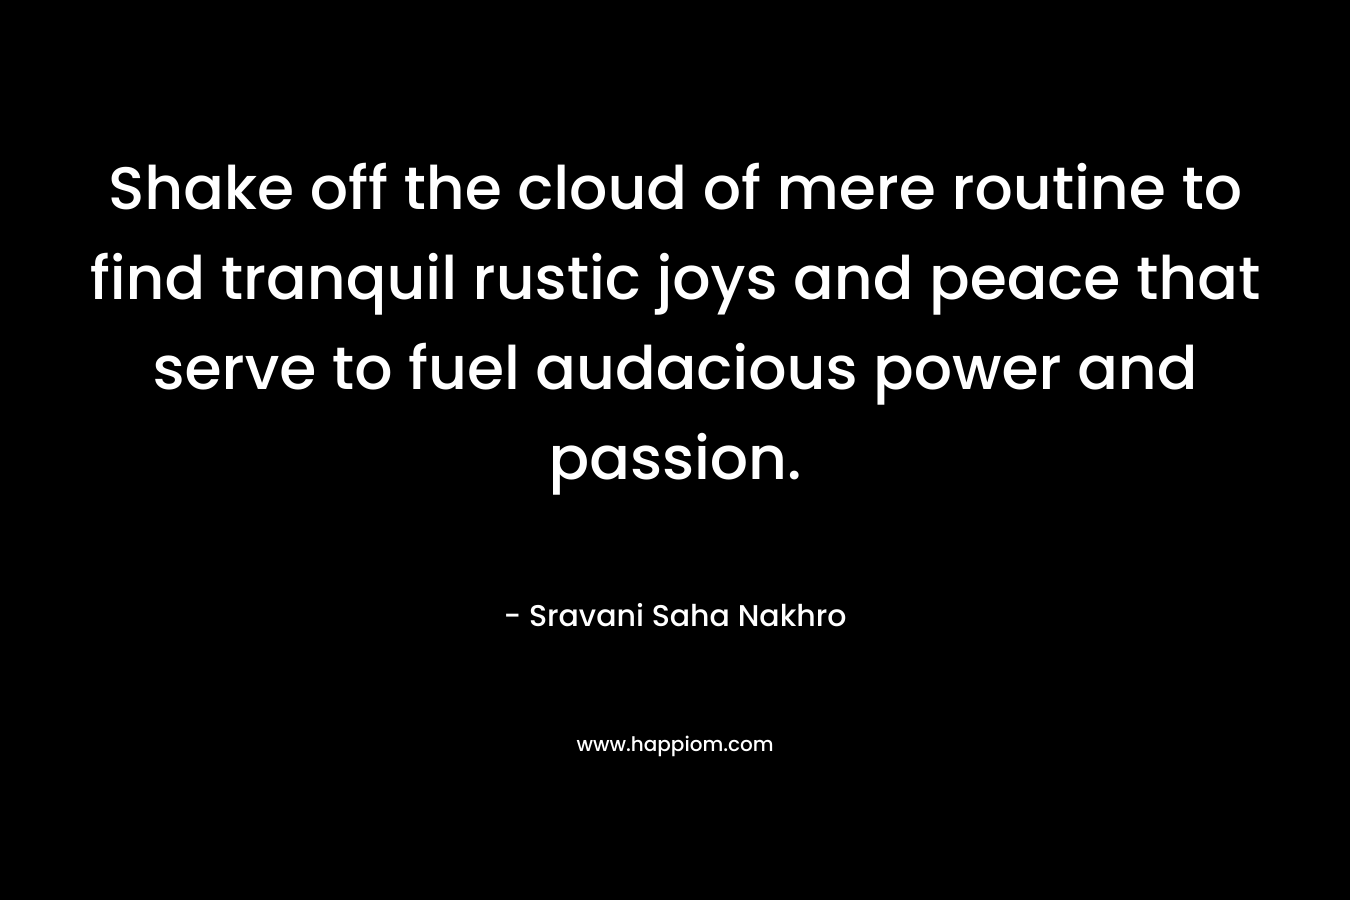 Shake off the cloud of mere routine to find tranquil rustic joys and peace that serve to fuel audacious power and passion.